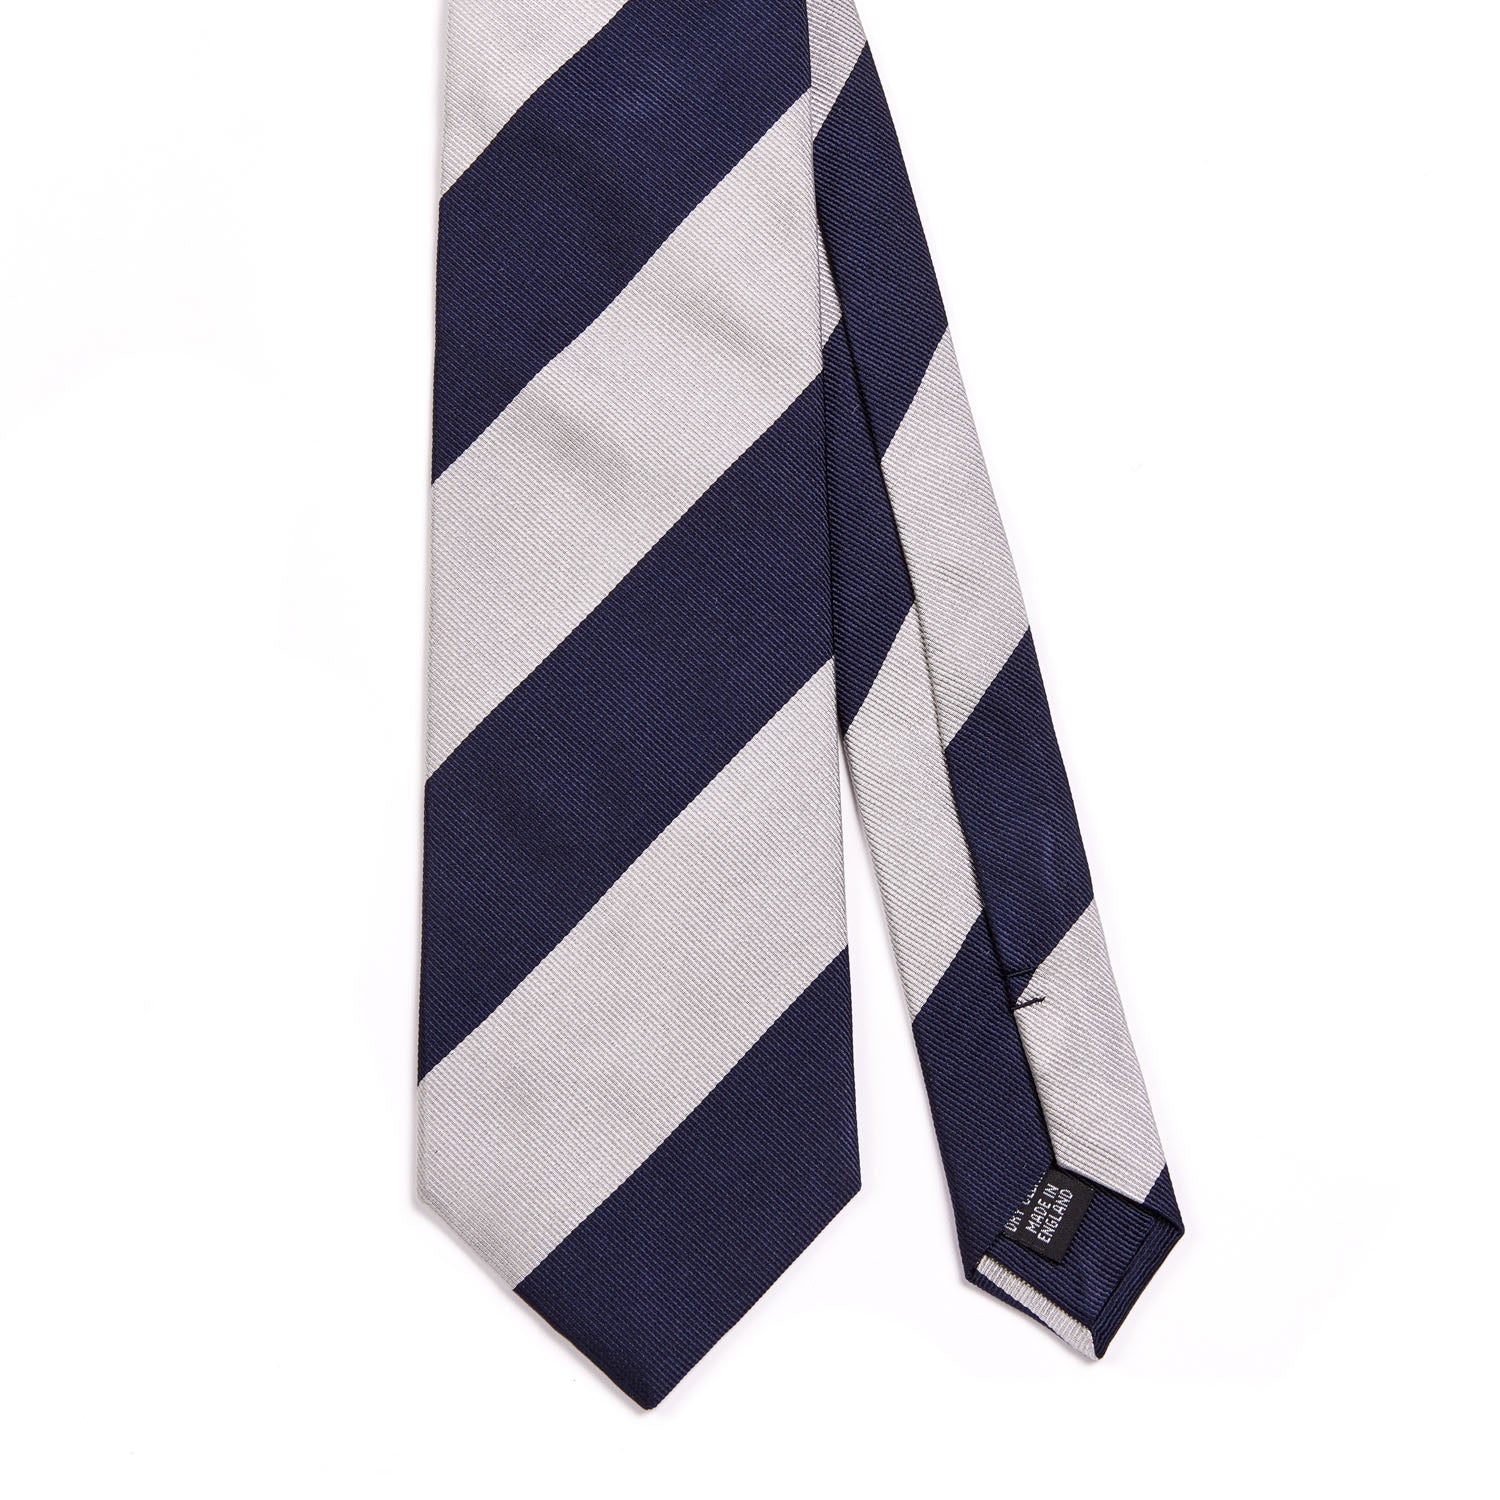 A KirbyAllison.com Sovereign Grade Navy Wide Rep Tie, 150 cm on a white background.